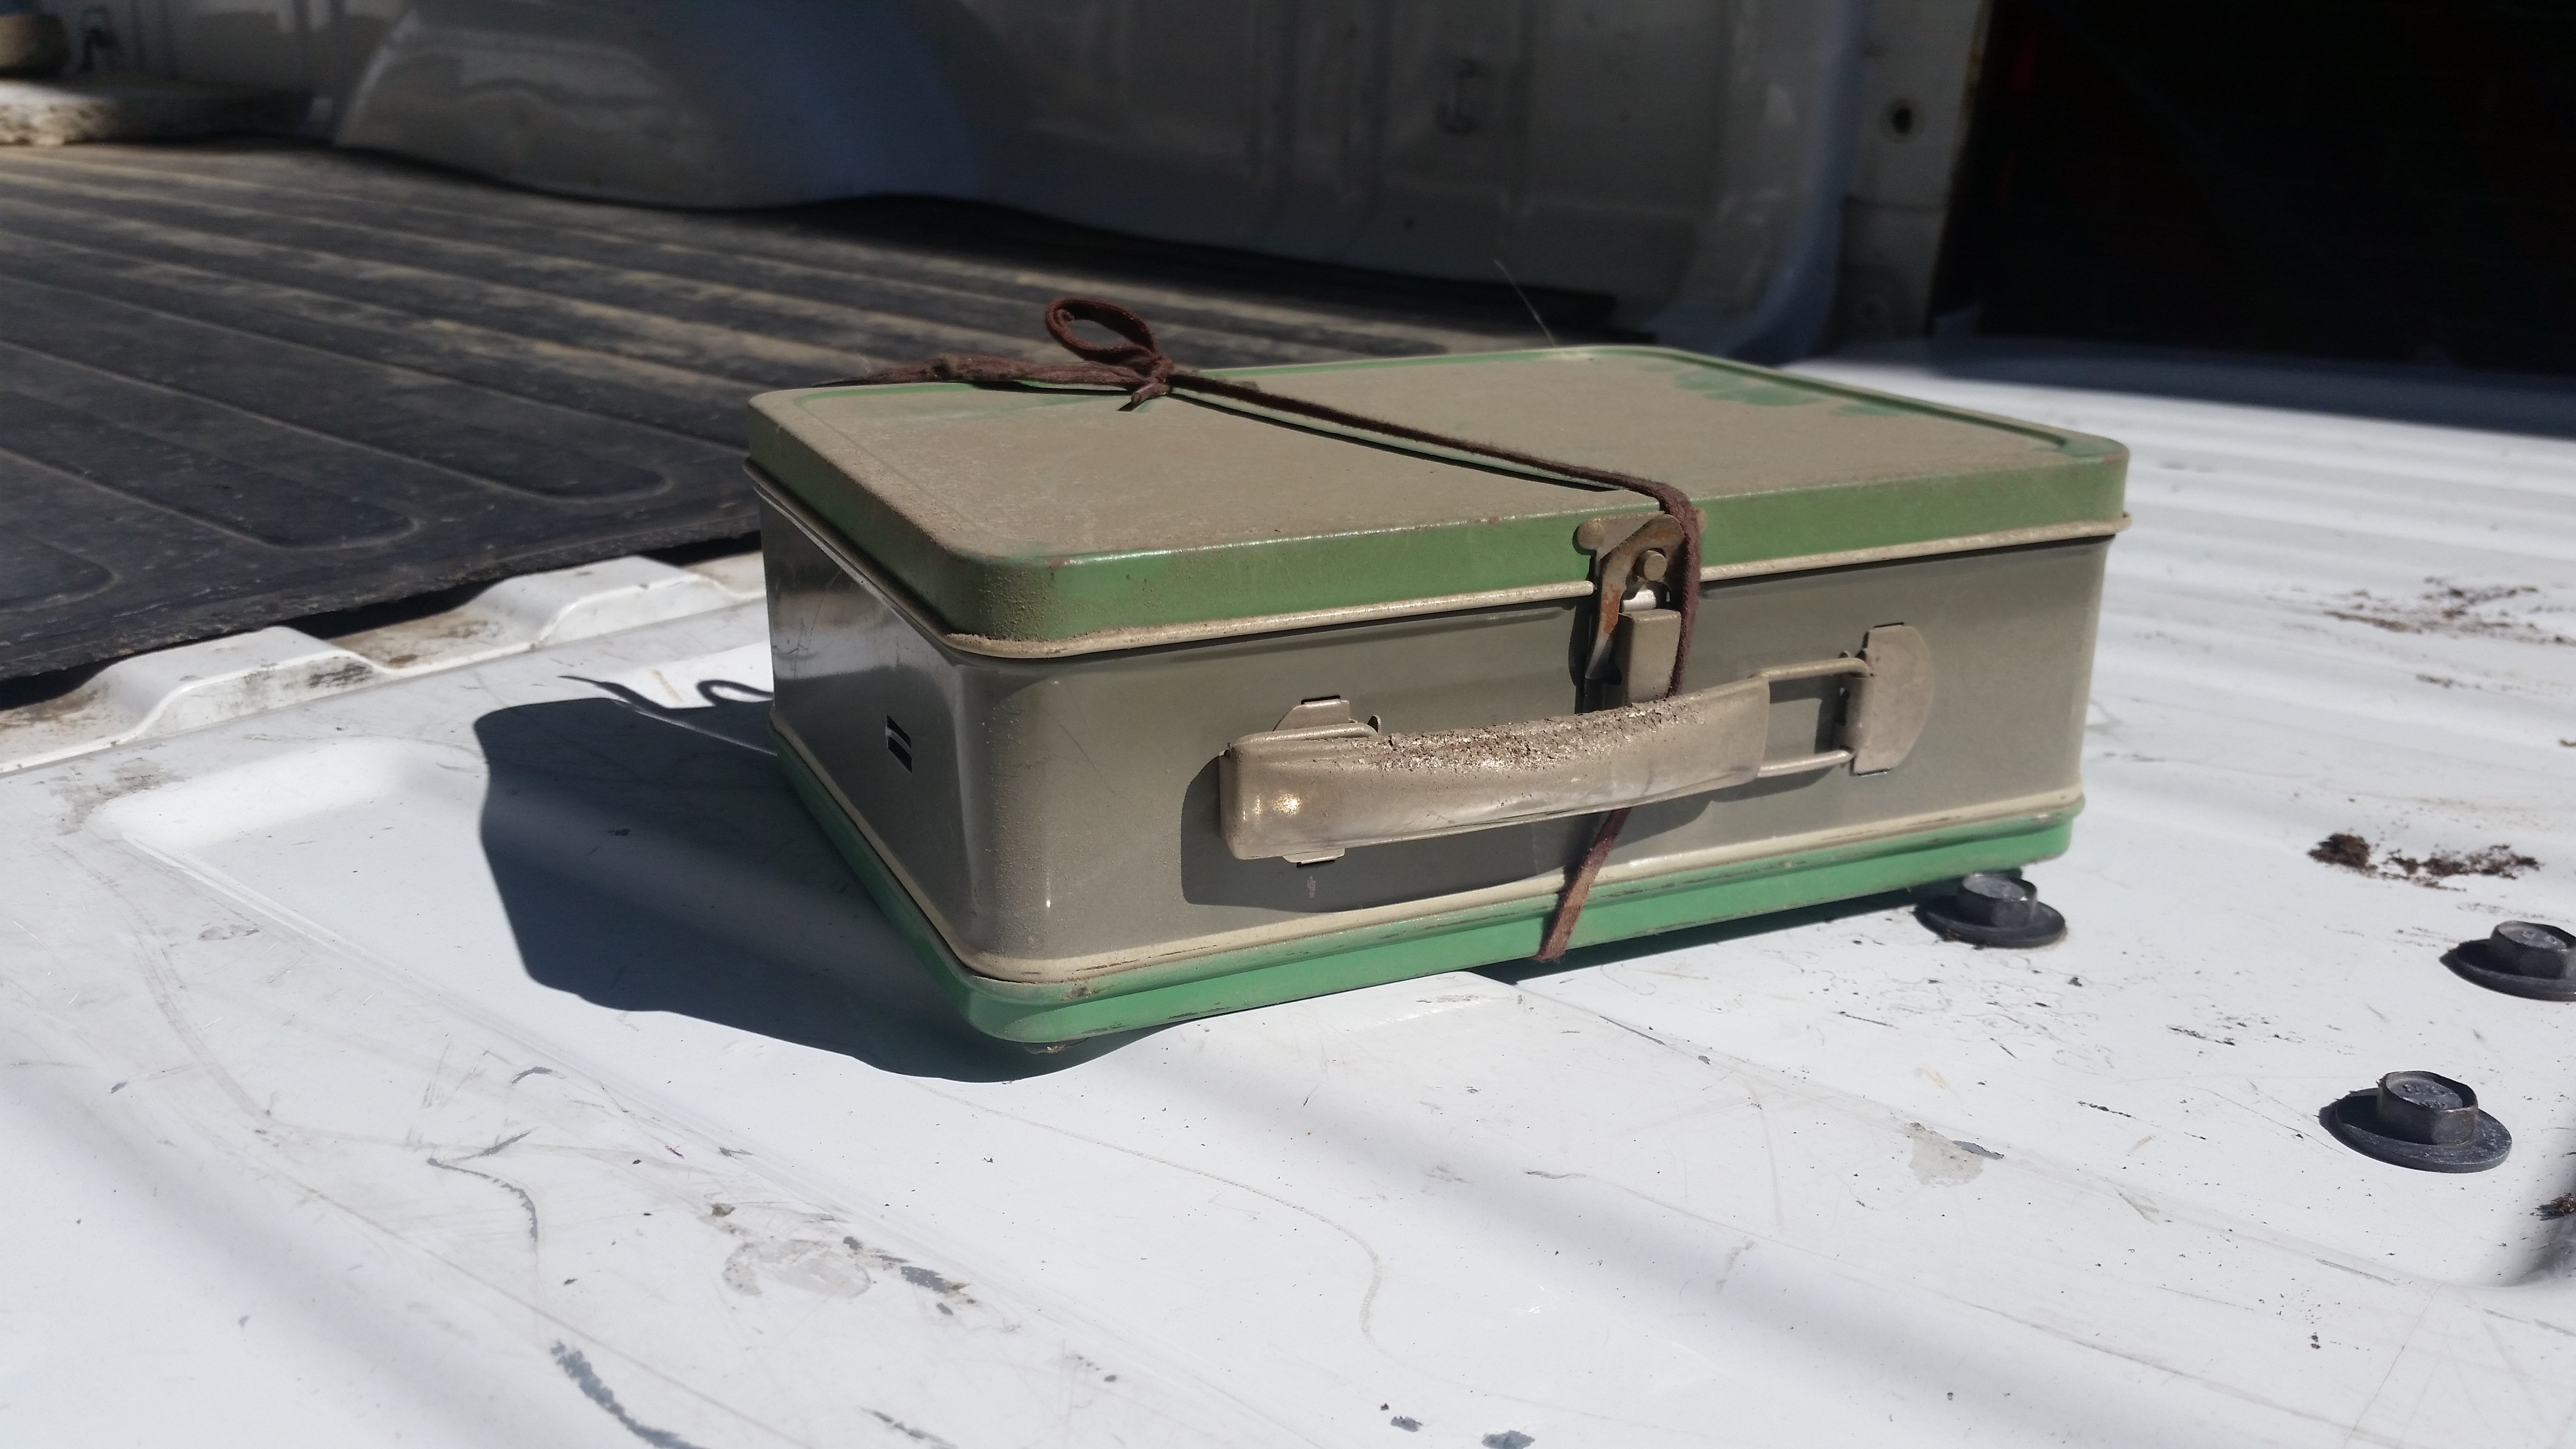 Picture of the discovered suitcase | Source: Imgur/branik12